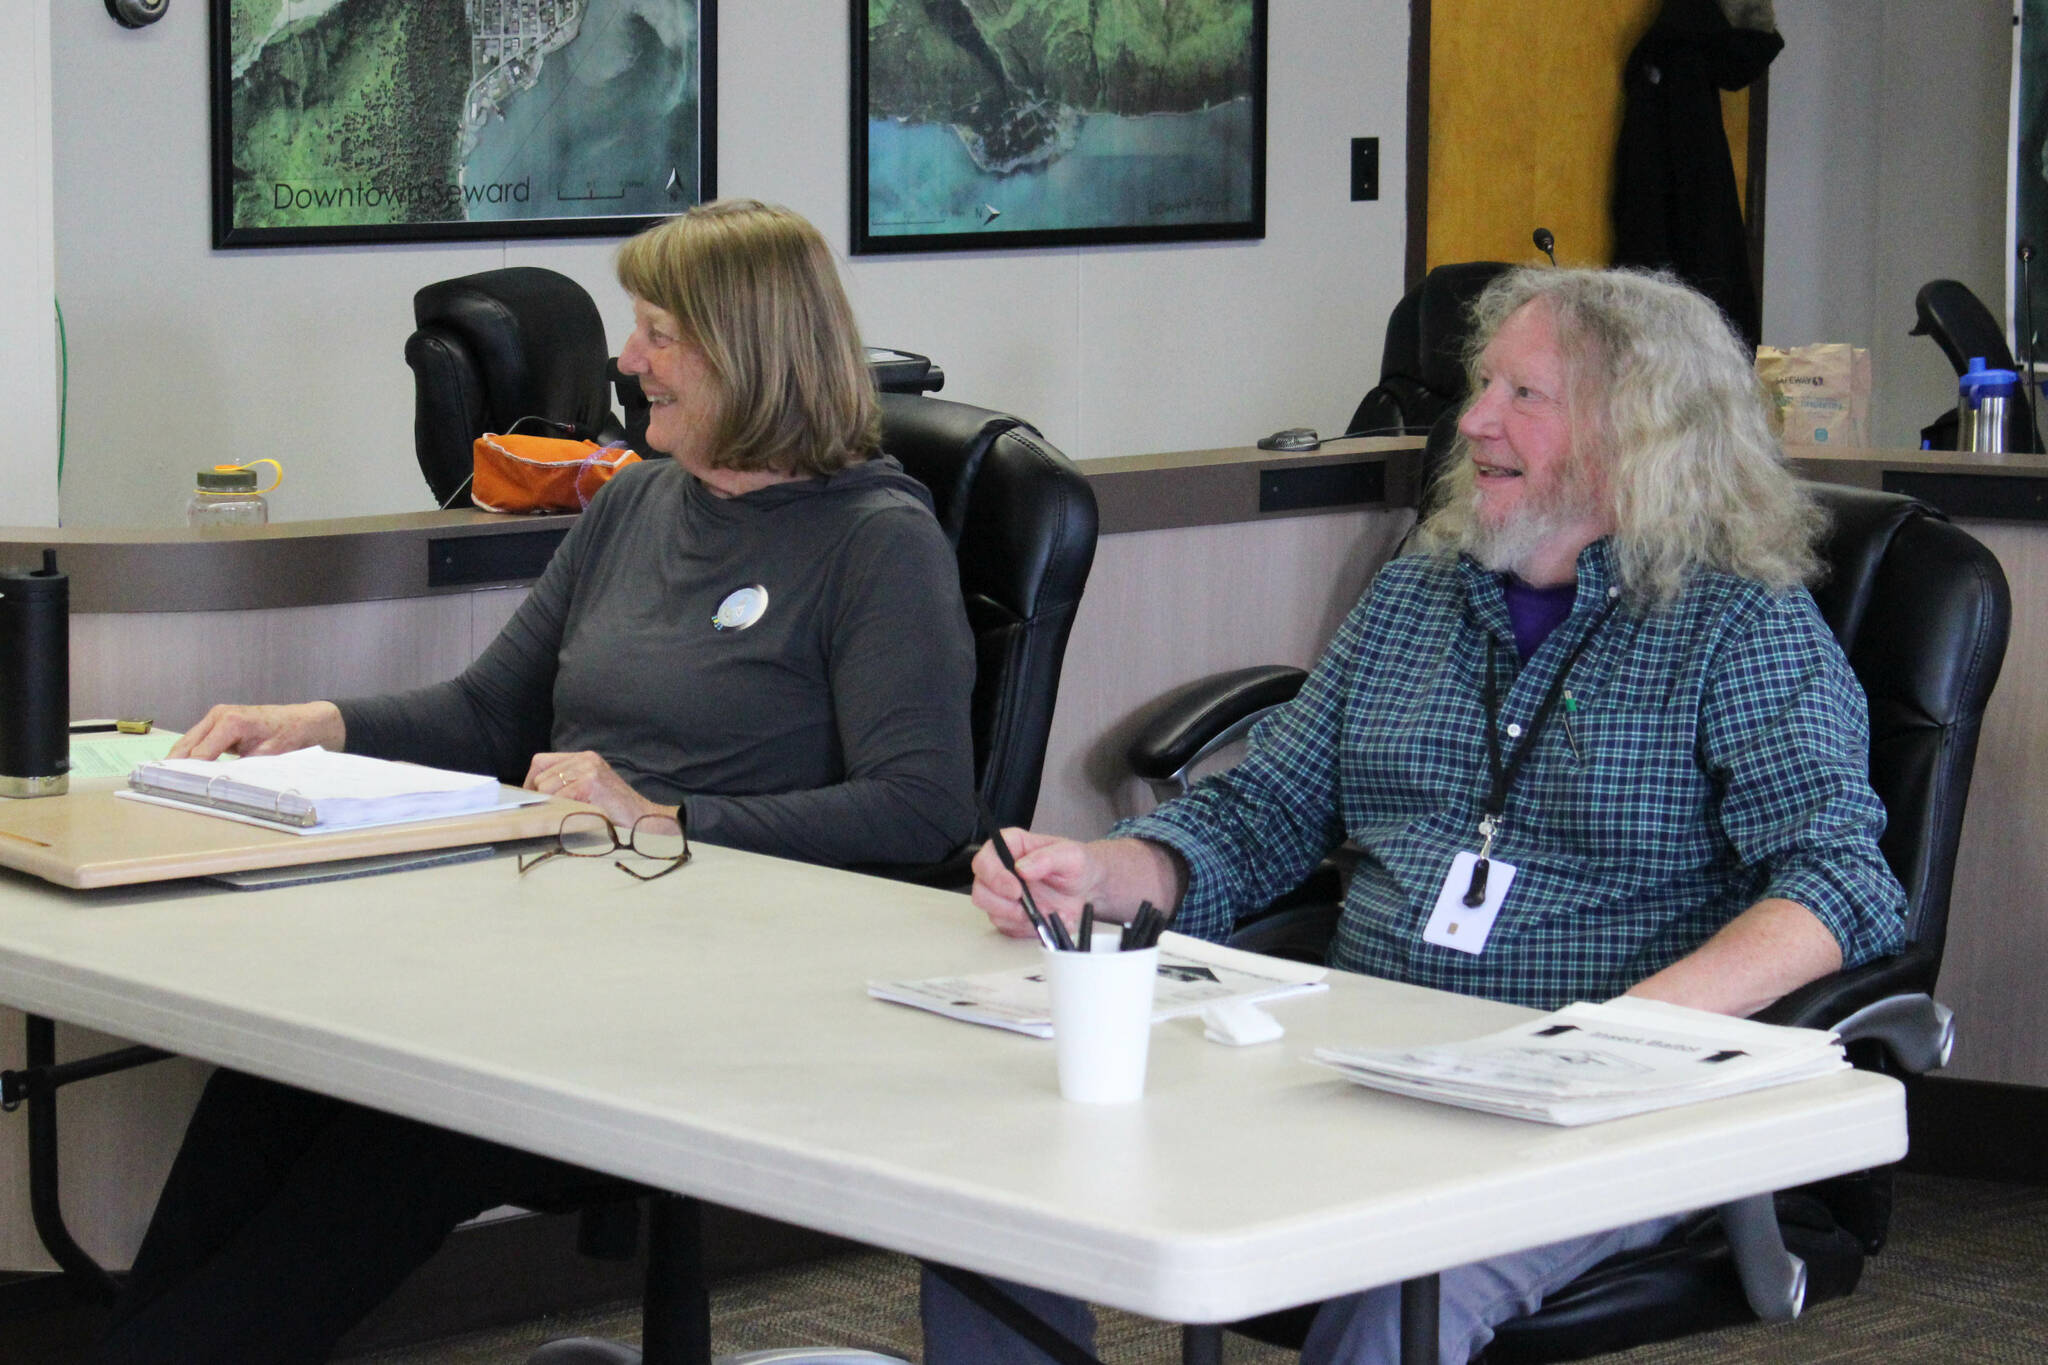 Poll workers Patricia Linville (left) and Mark Kansteiner (right) prepare to assist voters in Seward’s special election on Tuesday, May 2, 2023, in Seward, Alaska. (Ashlyn O’Hara/Peninsula Clarion)